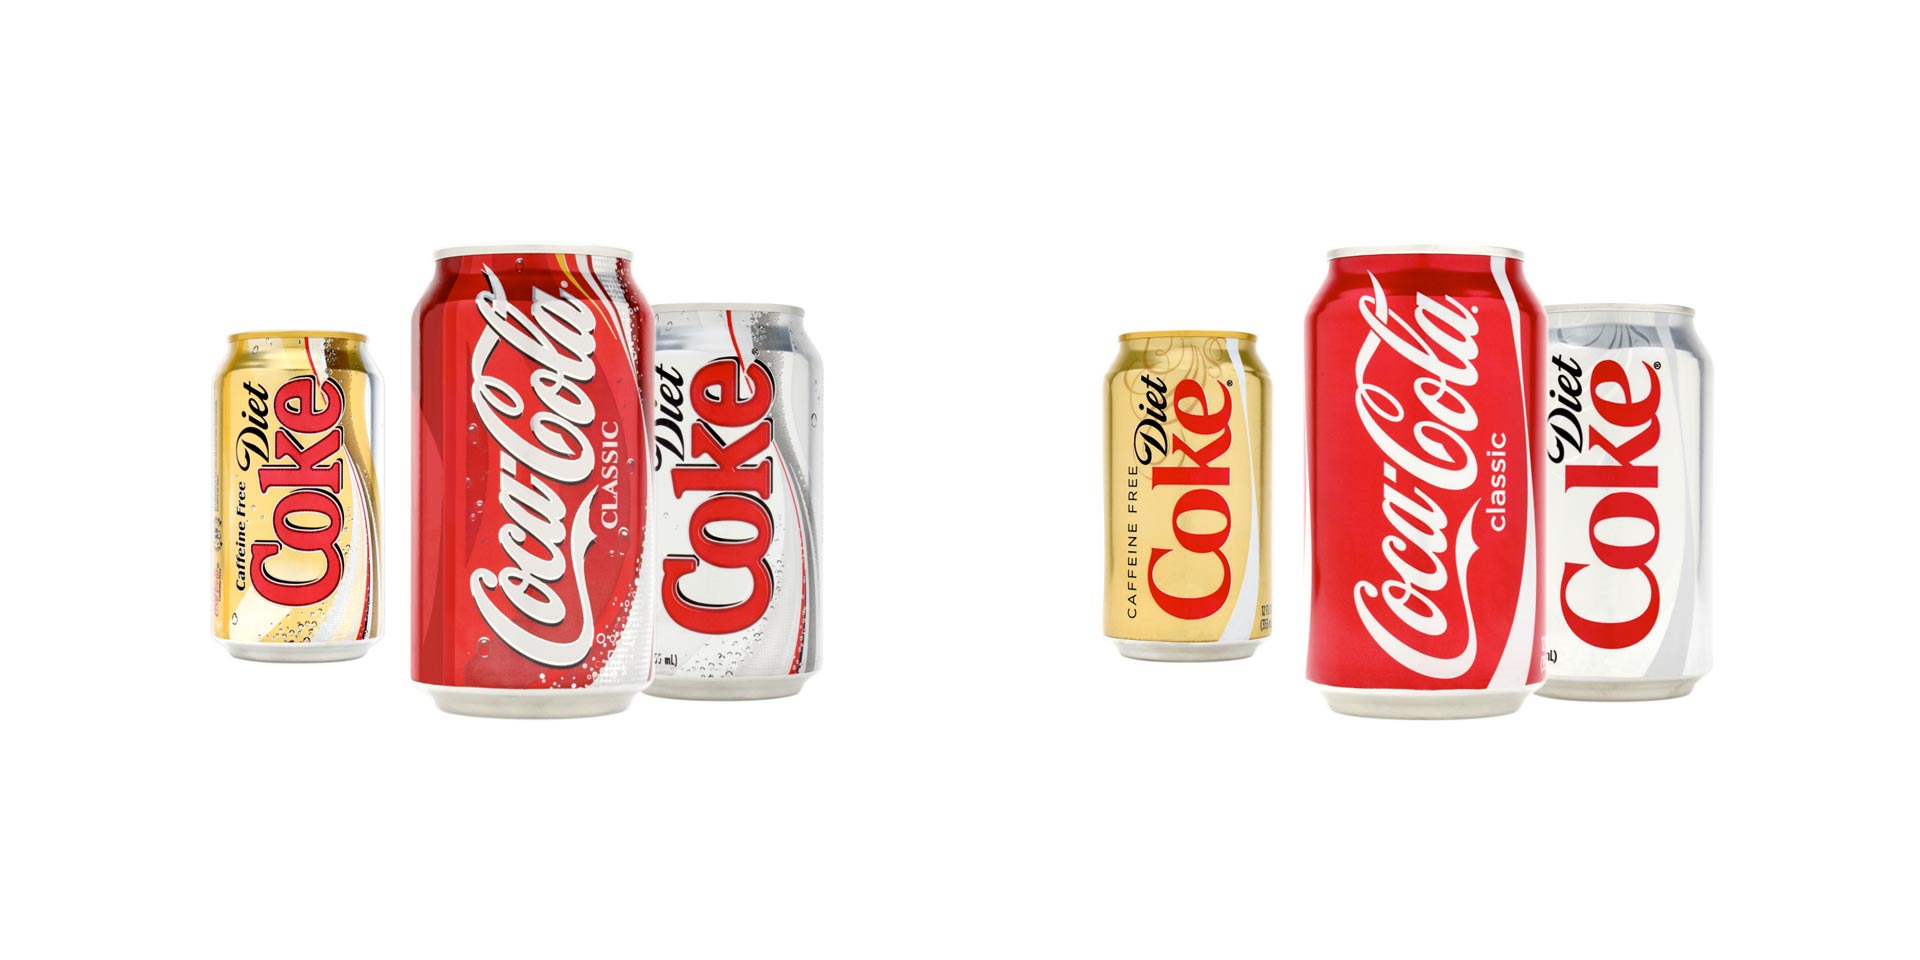 Coca-Cola cand before and after